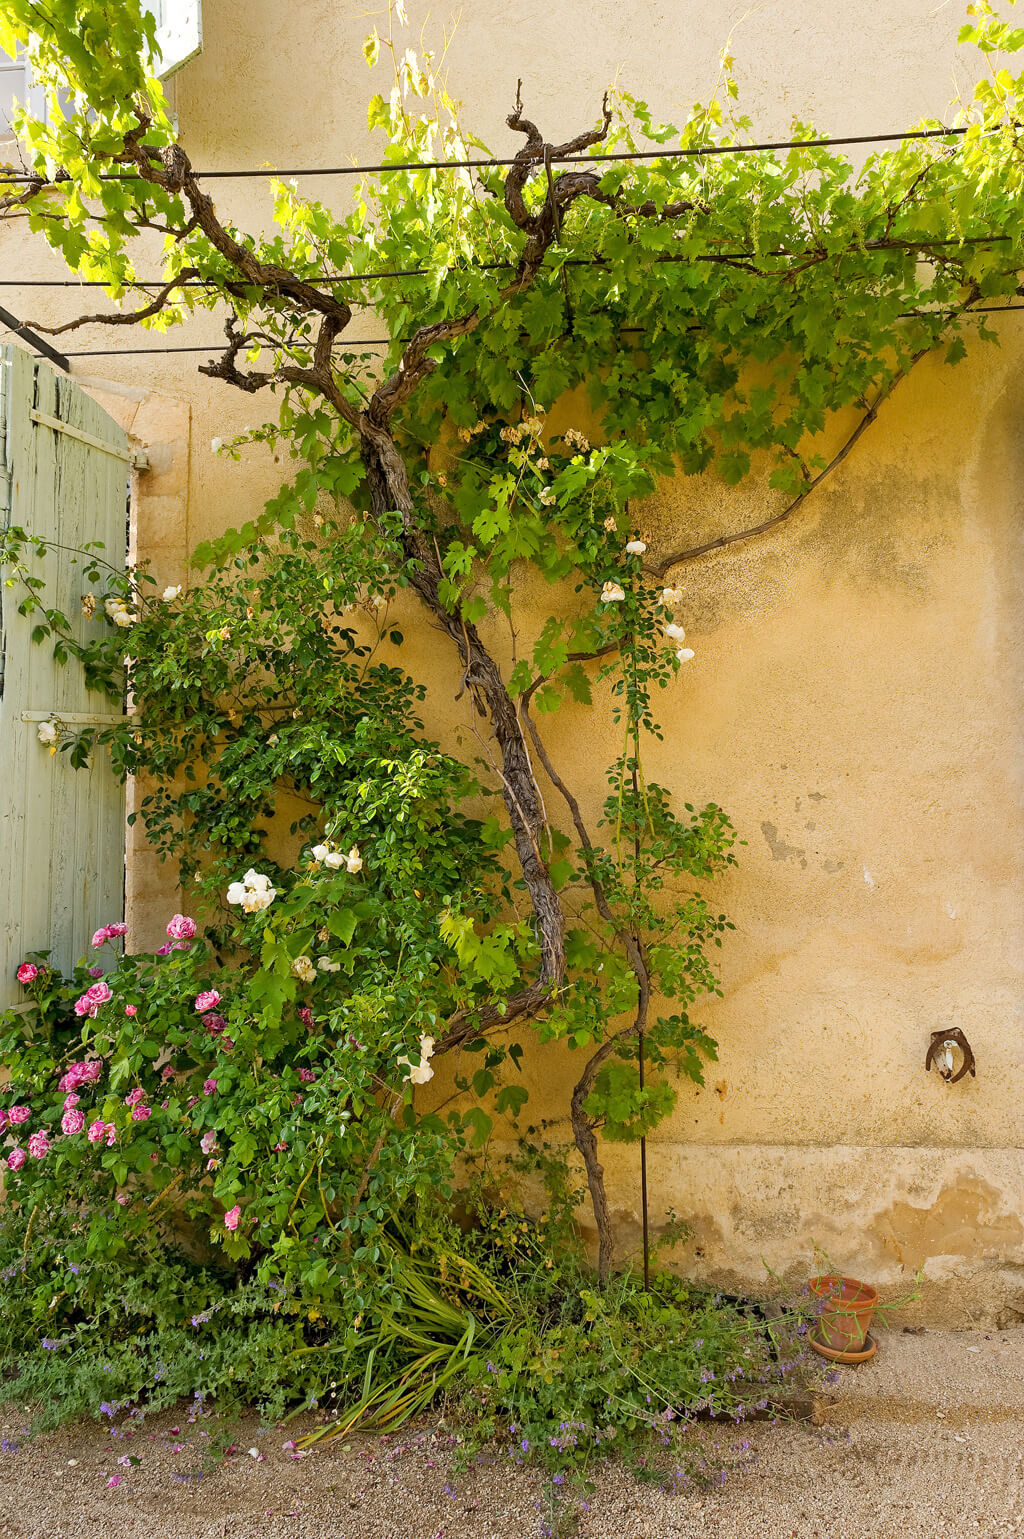 Provence retreat! Inspiring French country interiors, enchanting gardens, and rich architectural details in a historical and luxurious vacation rental from HAVEN IN. #provence #frenchchateau #frenchcountry #frenchfarmhouse #interiordesign #architecture #european #counrtryhouse #havenin #rusticelegance